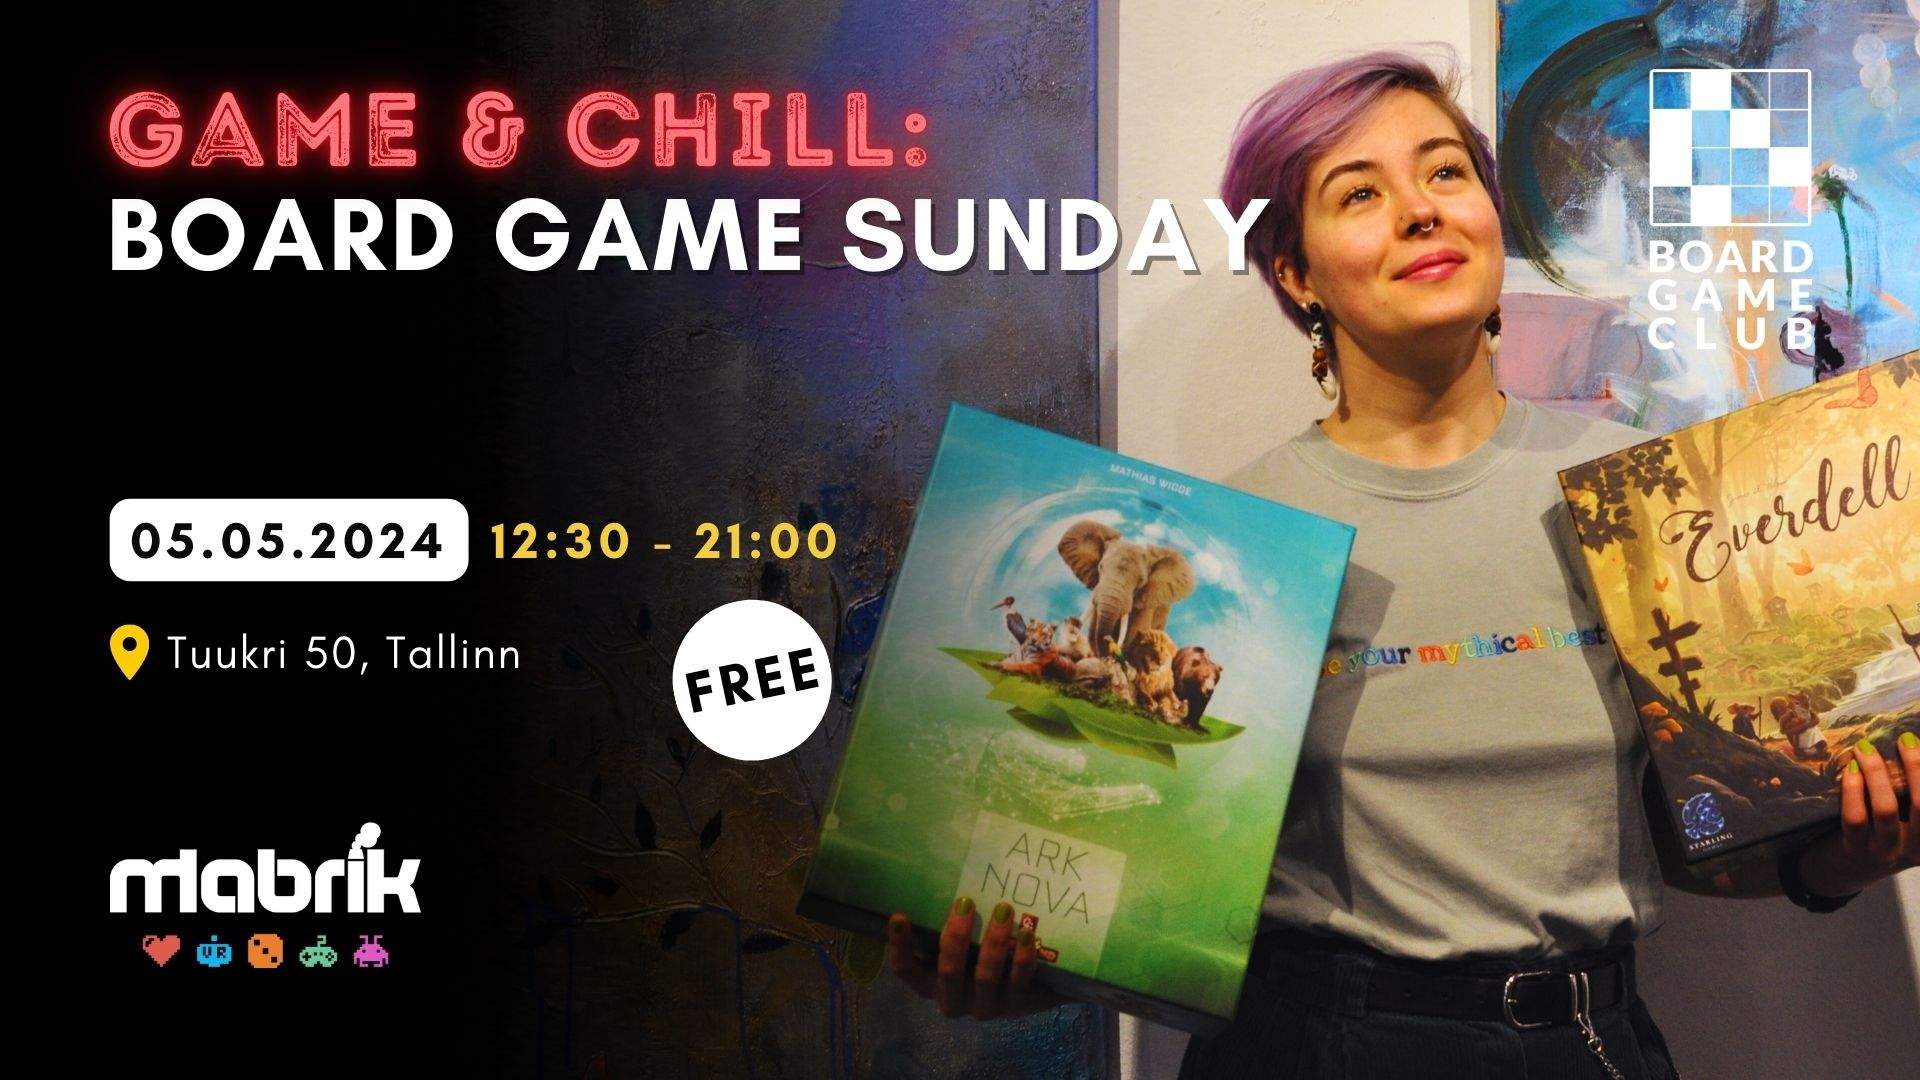 Events - 05.05.2024 - Board Game Sunday